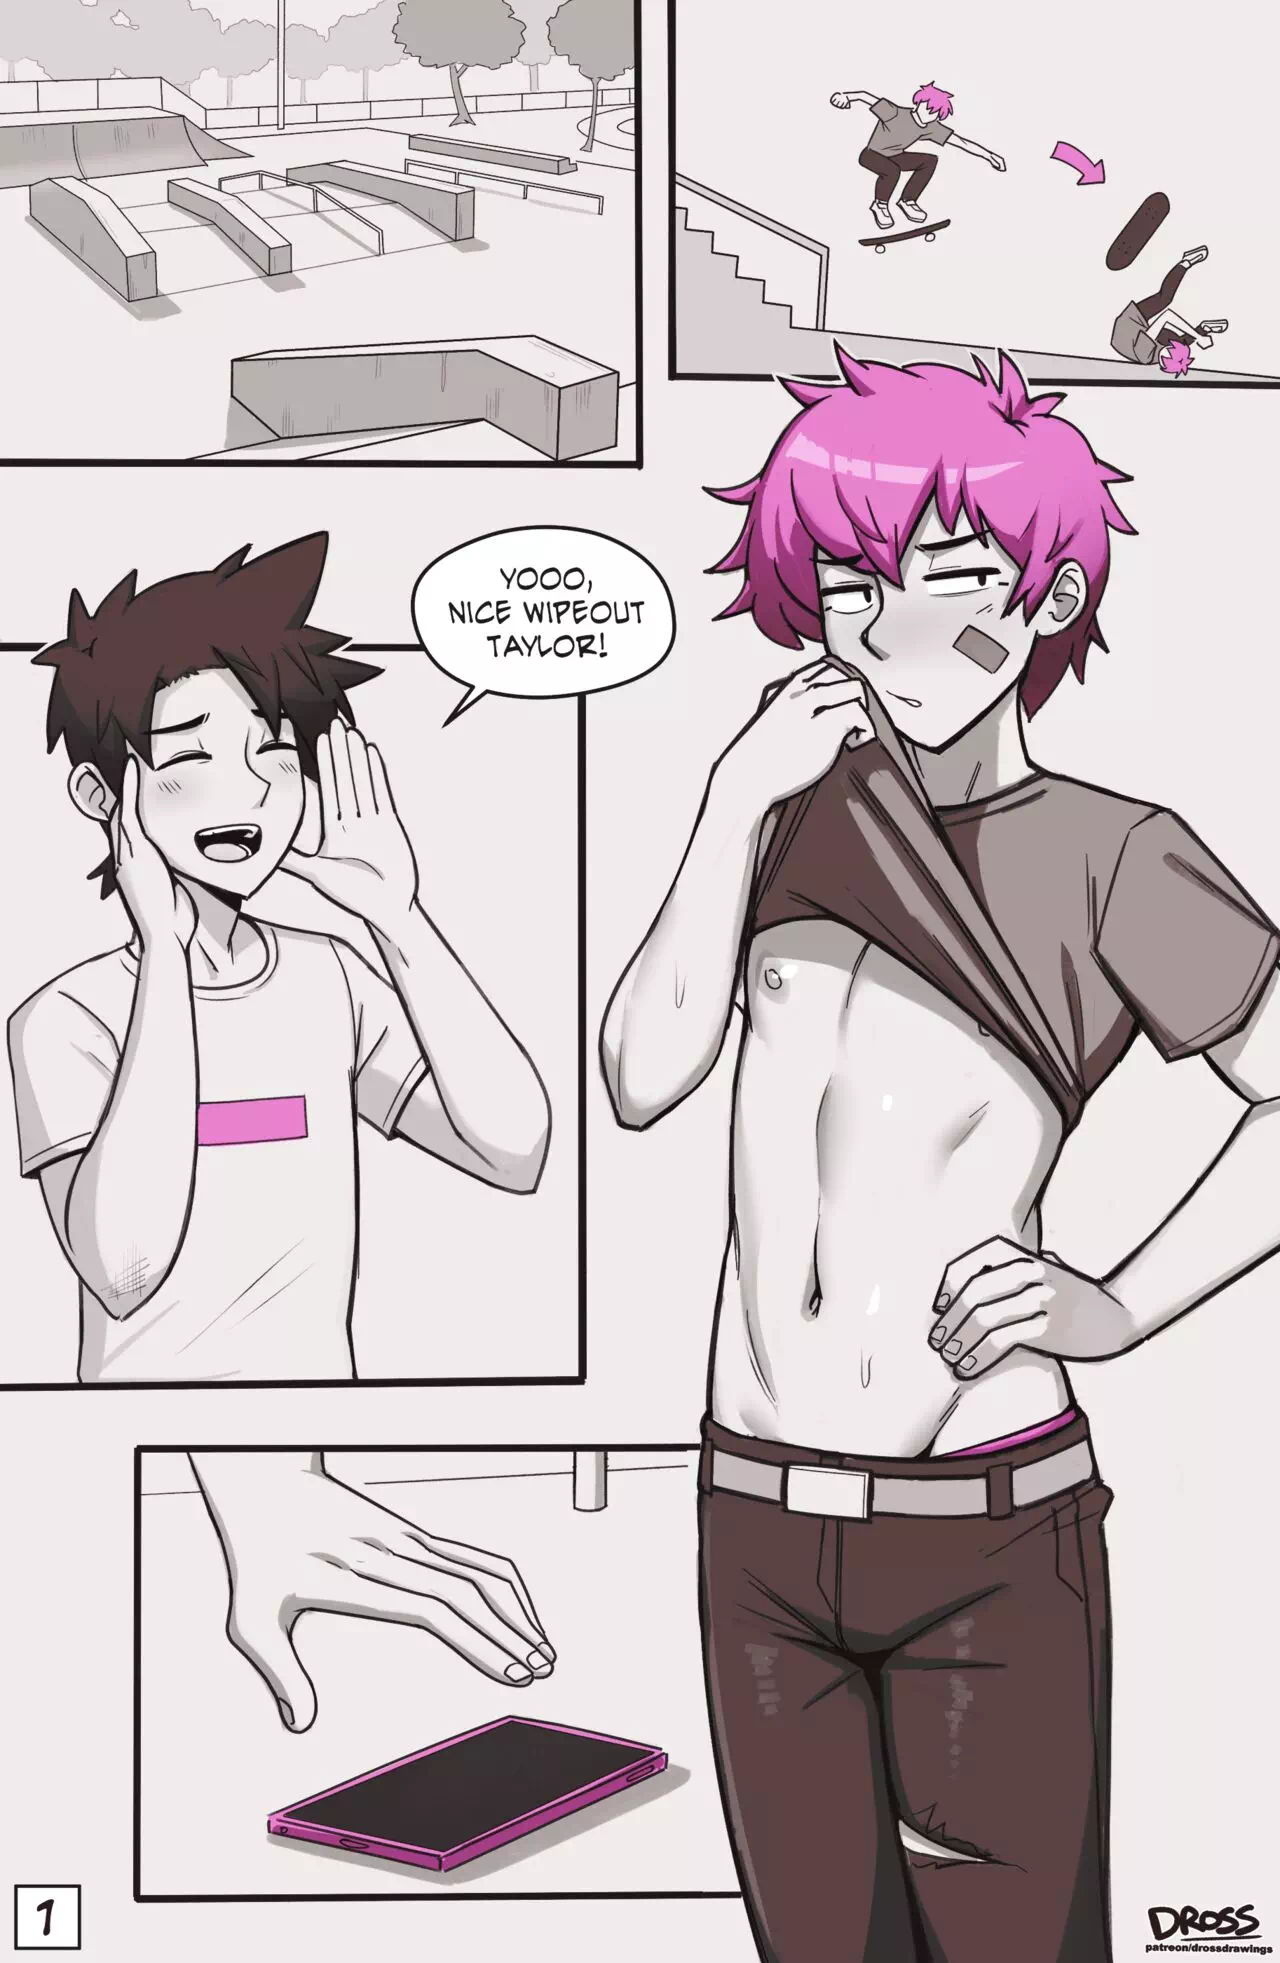 Comic Boy Porn - Yaoi porn comics Skater Boi â€“ See you later boy! Part 2. Updated. New pages  added!